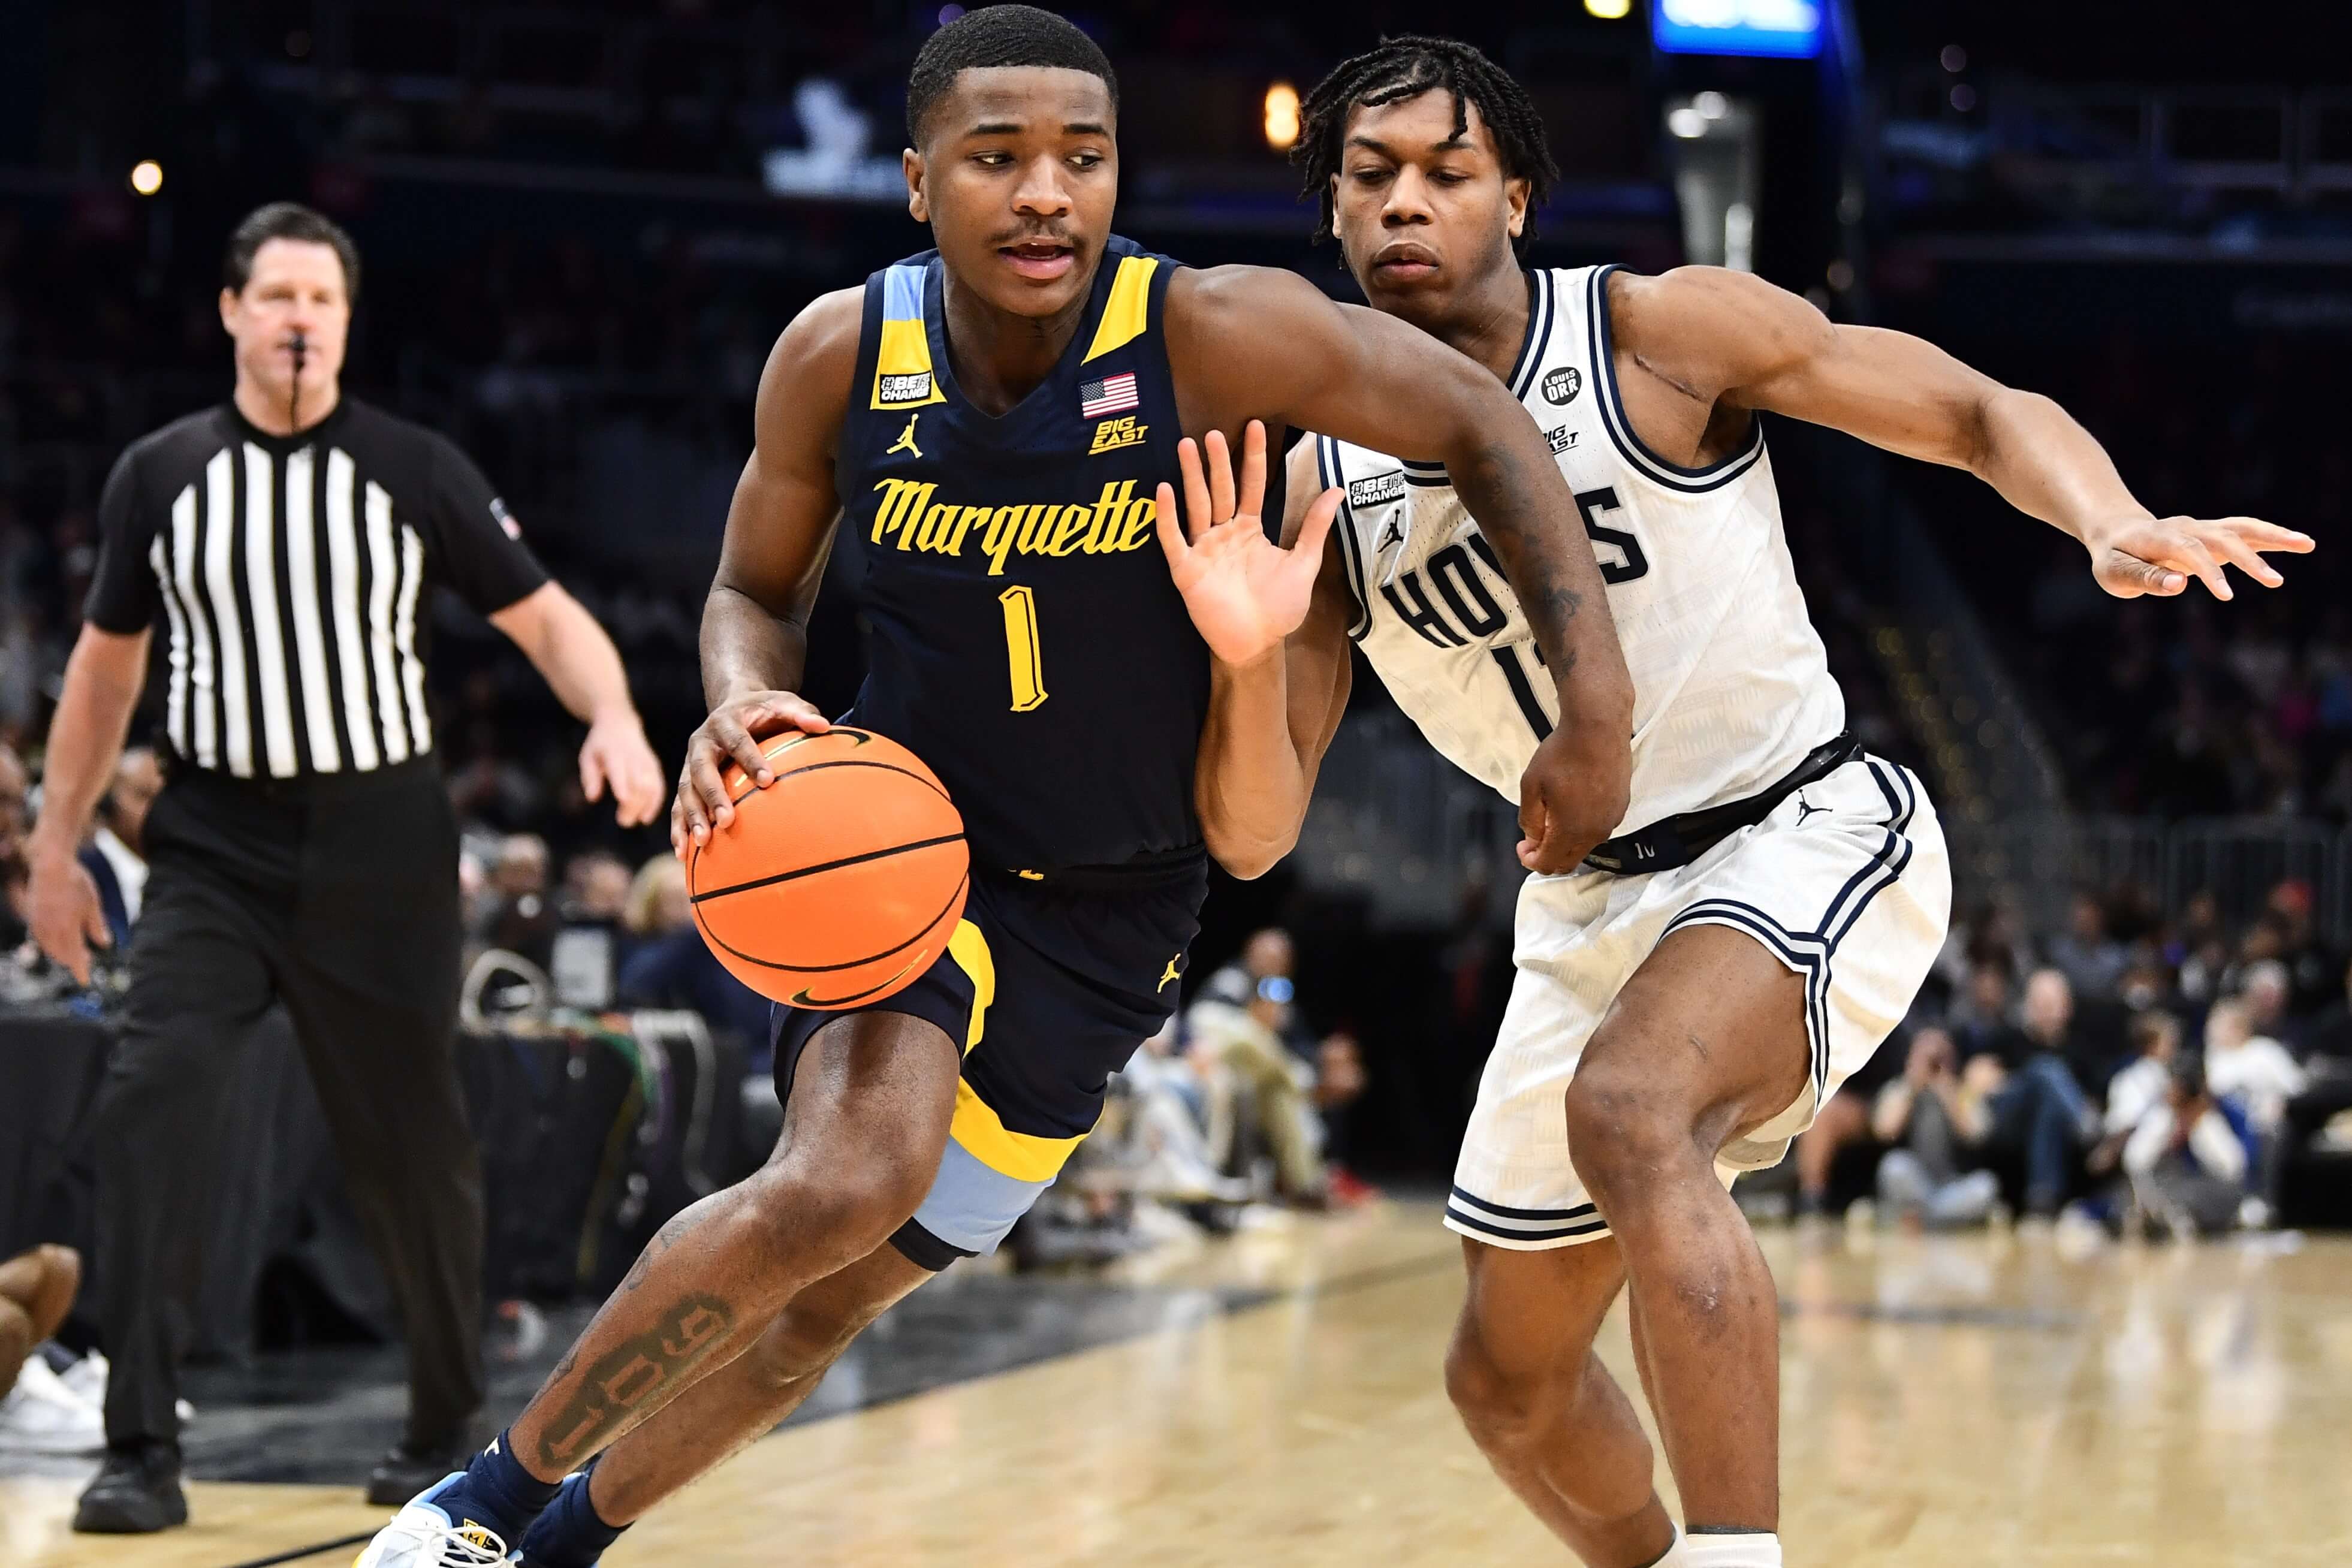 Xavier vs Marquette Odds, Picks, and Predictions Tonight